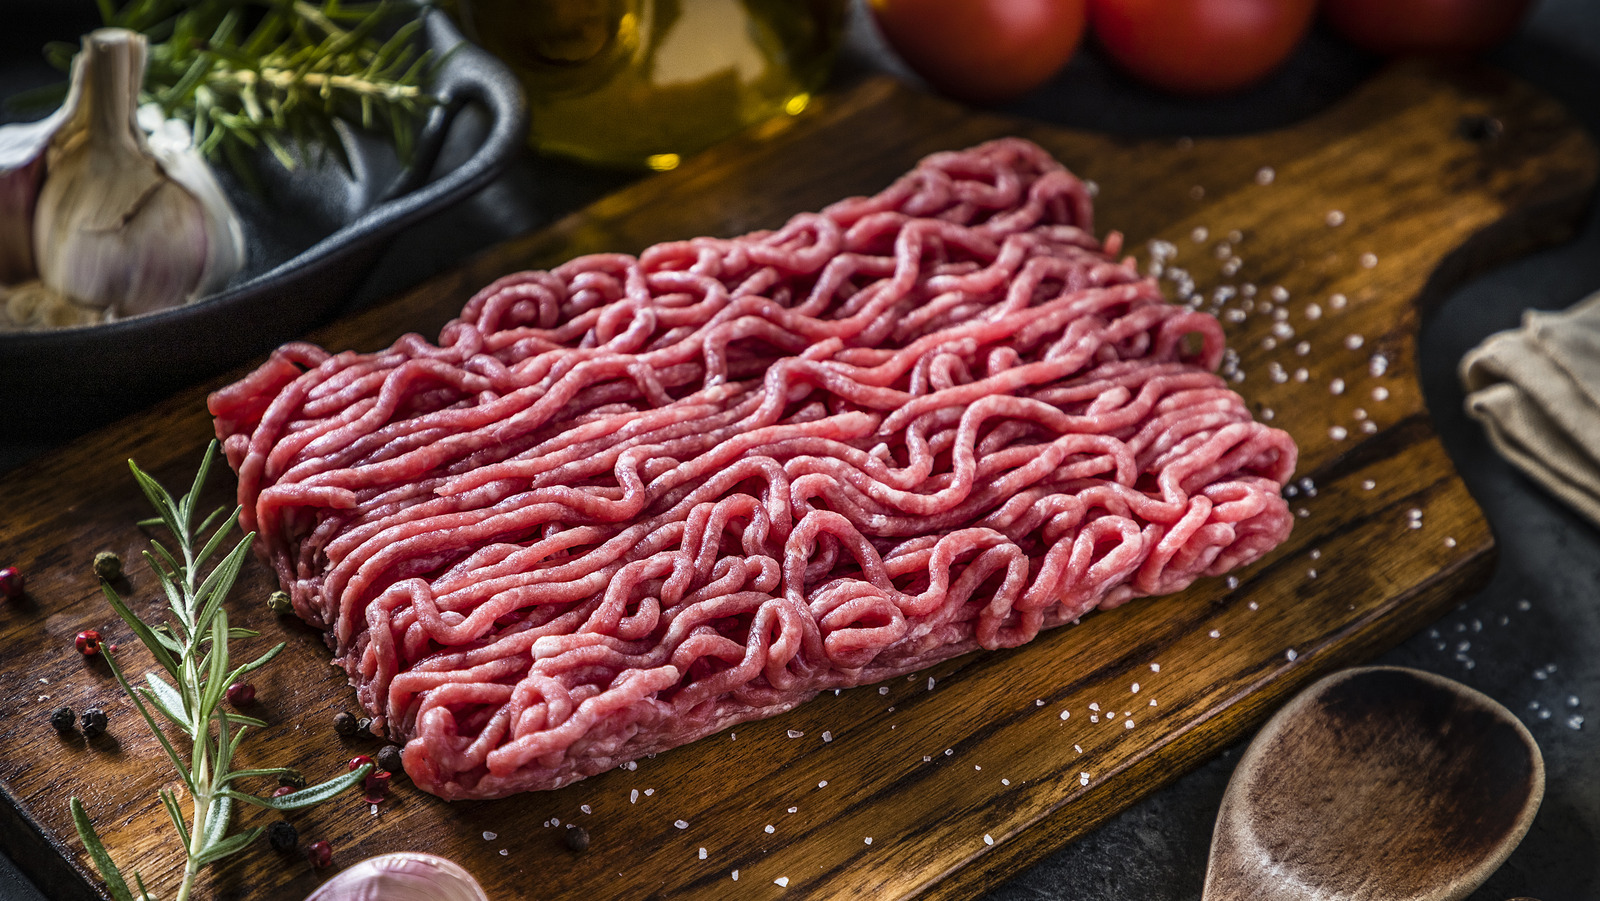 https://www.mashed.com/img/gallery/the-fatty-difference-between-ground-beef-and-hamburger-meat/l-intro-1691940526.jpg